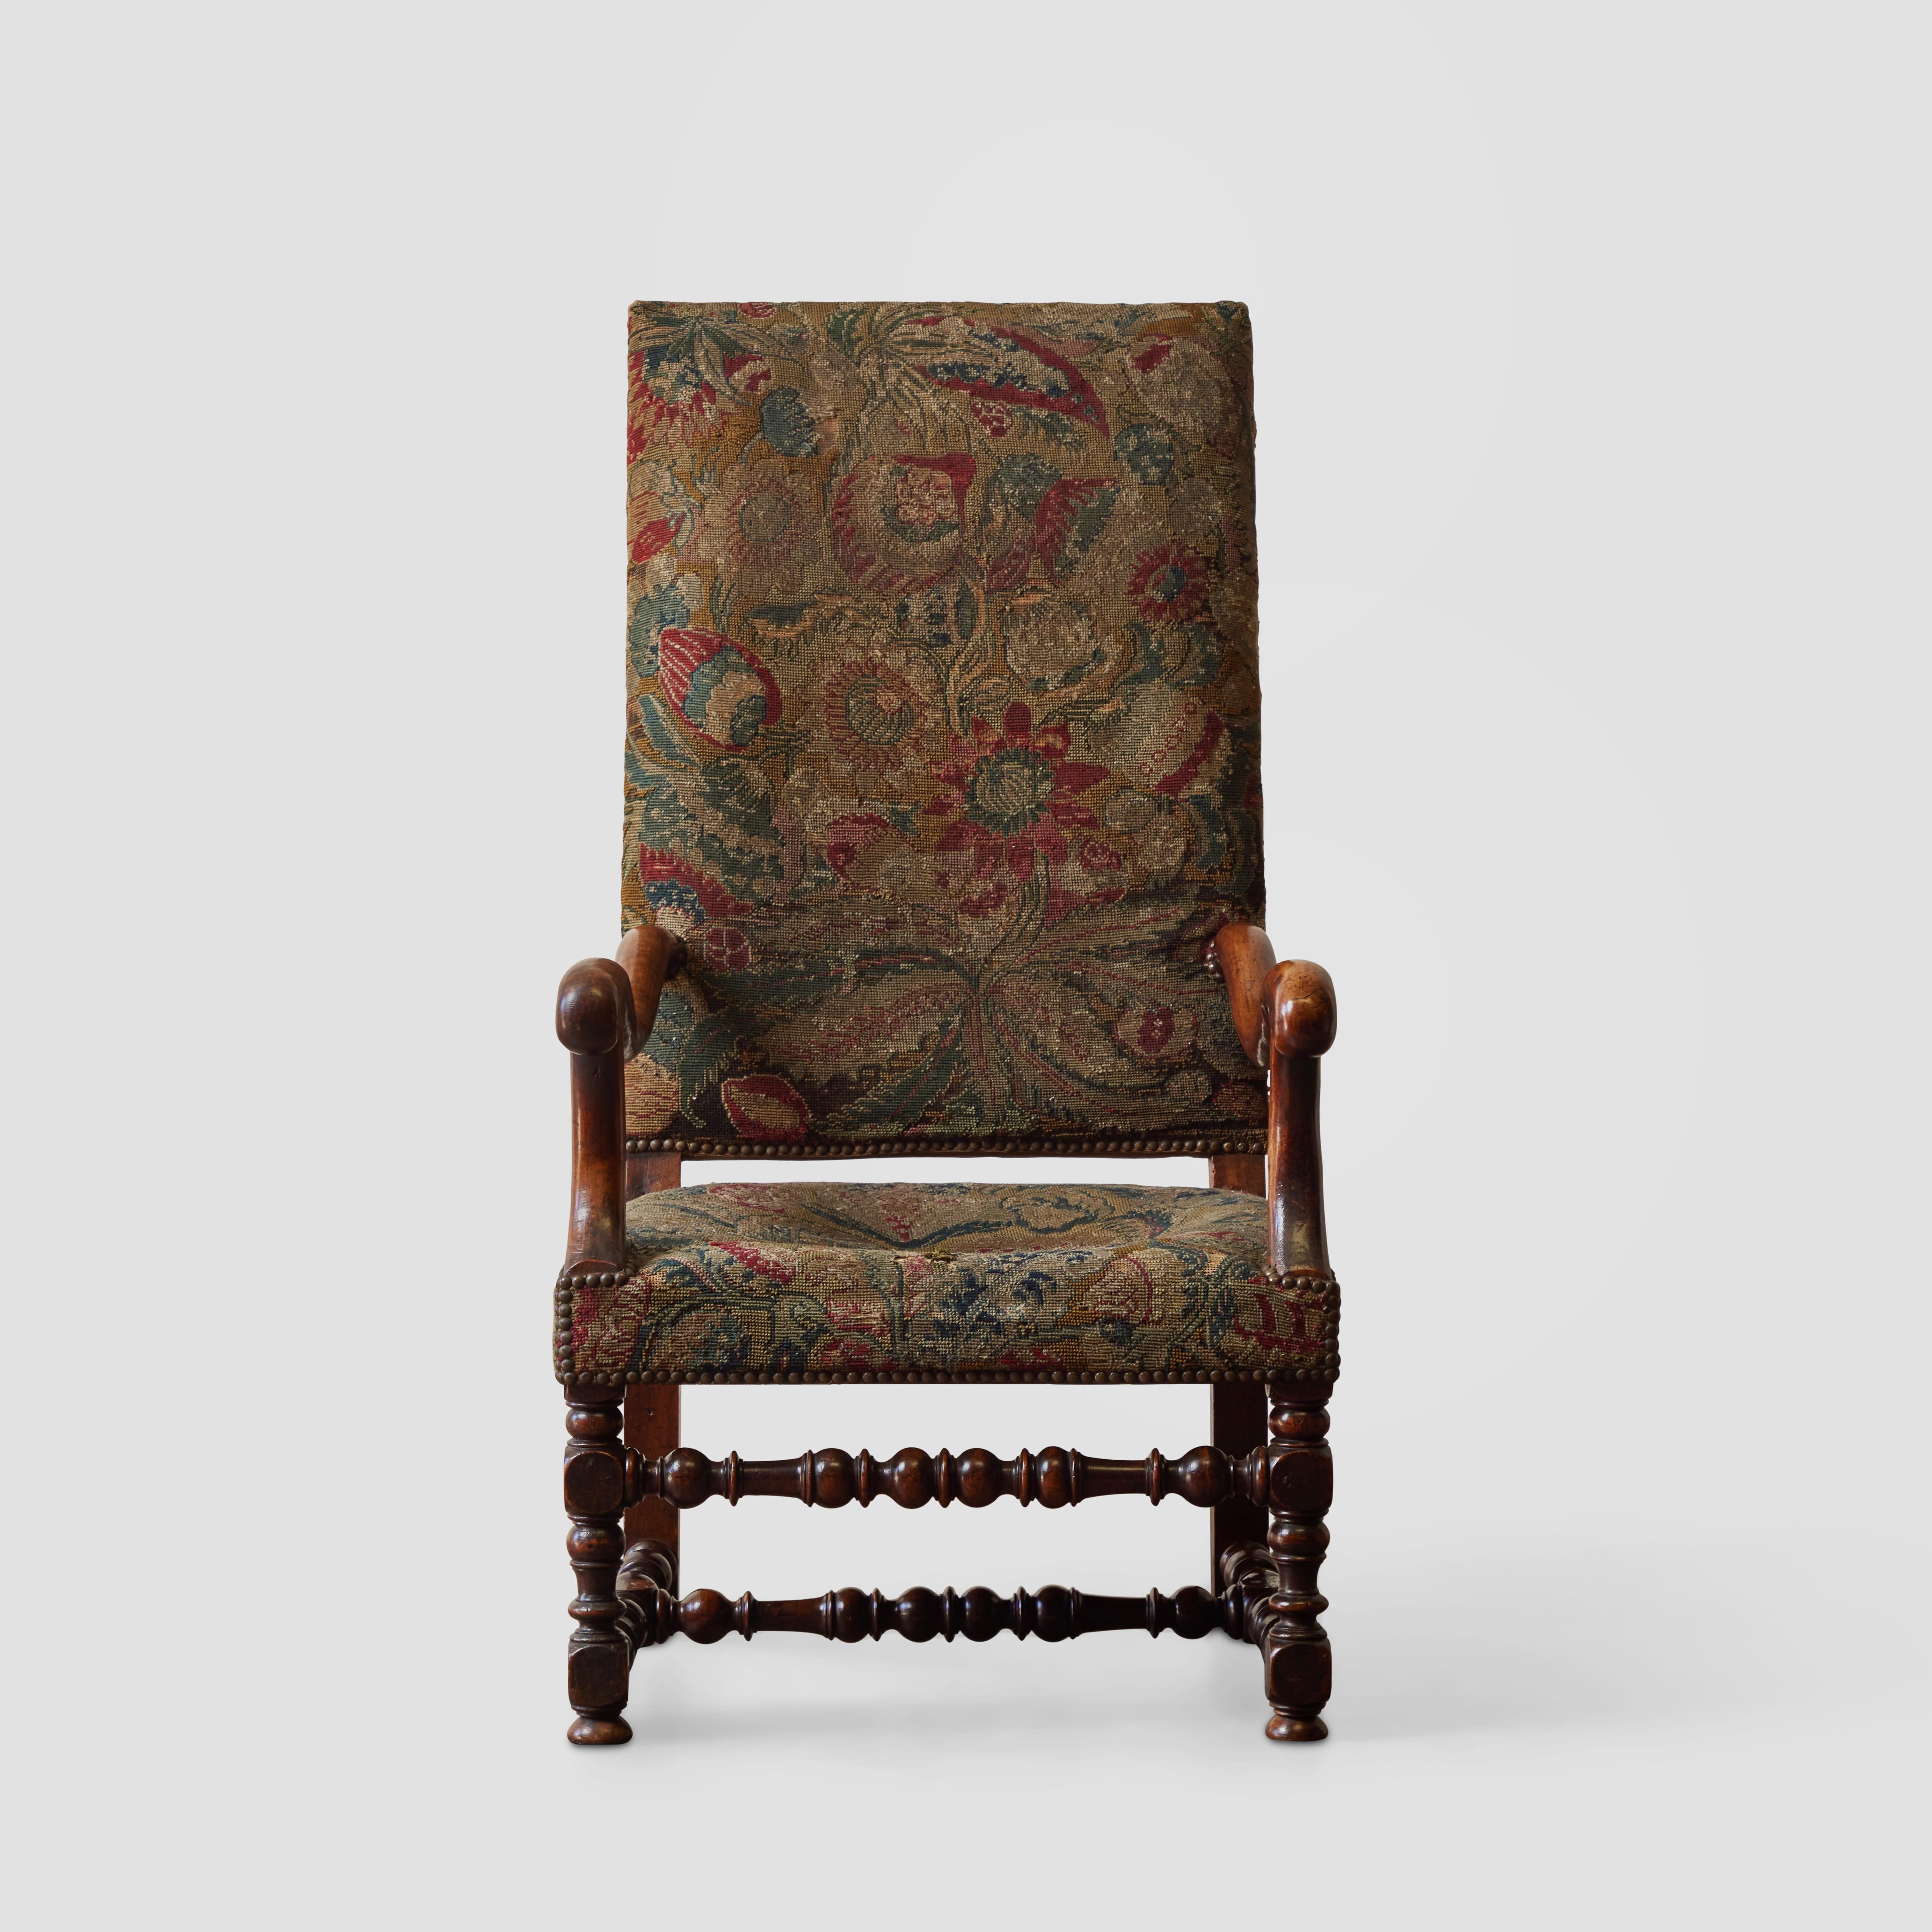 Exquisite French 18th-century high-back armchair with original handwoven tapestry upholstery and turned wood legs. This piece is exceptional for its craftsmanship and finely aged condition. With dusky shades of gold, crimson, blue, and moss, the